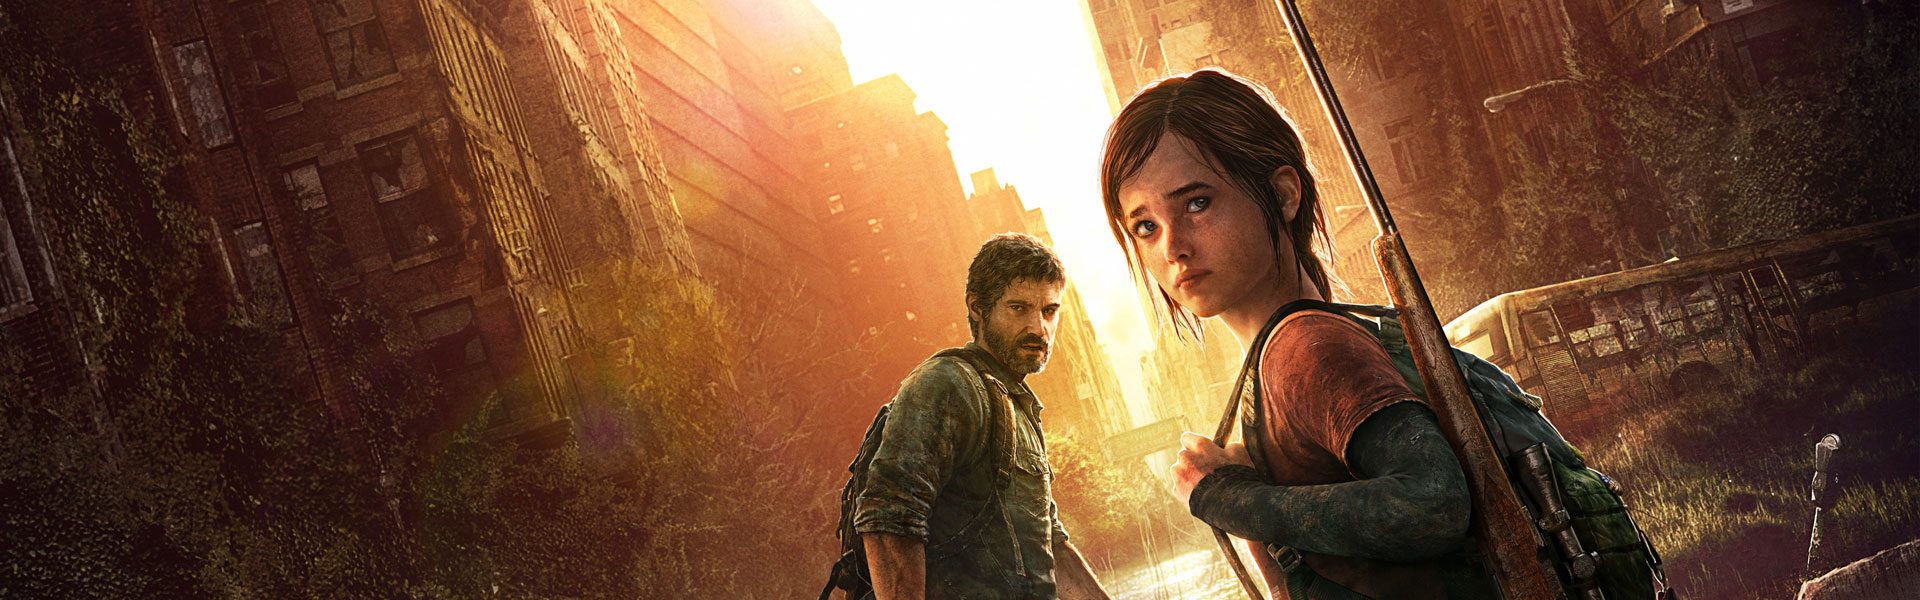 the last of us ps4 store